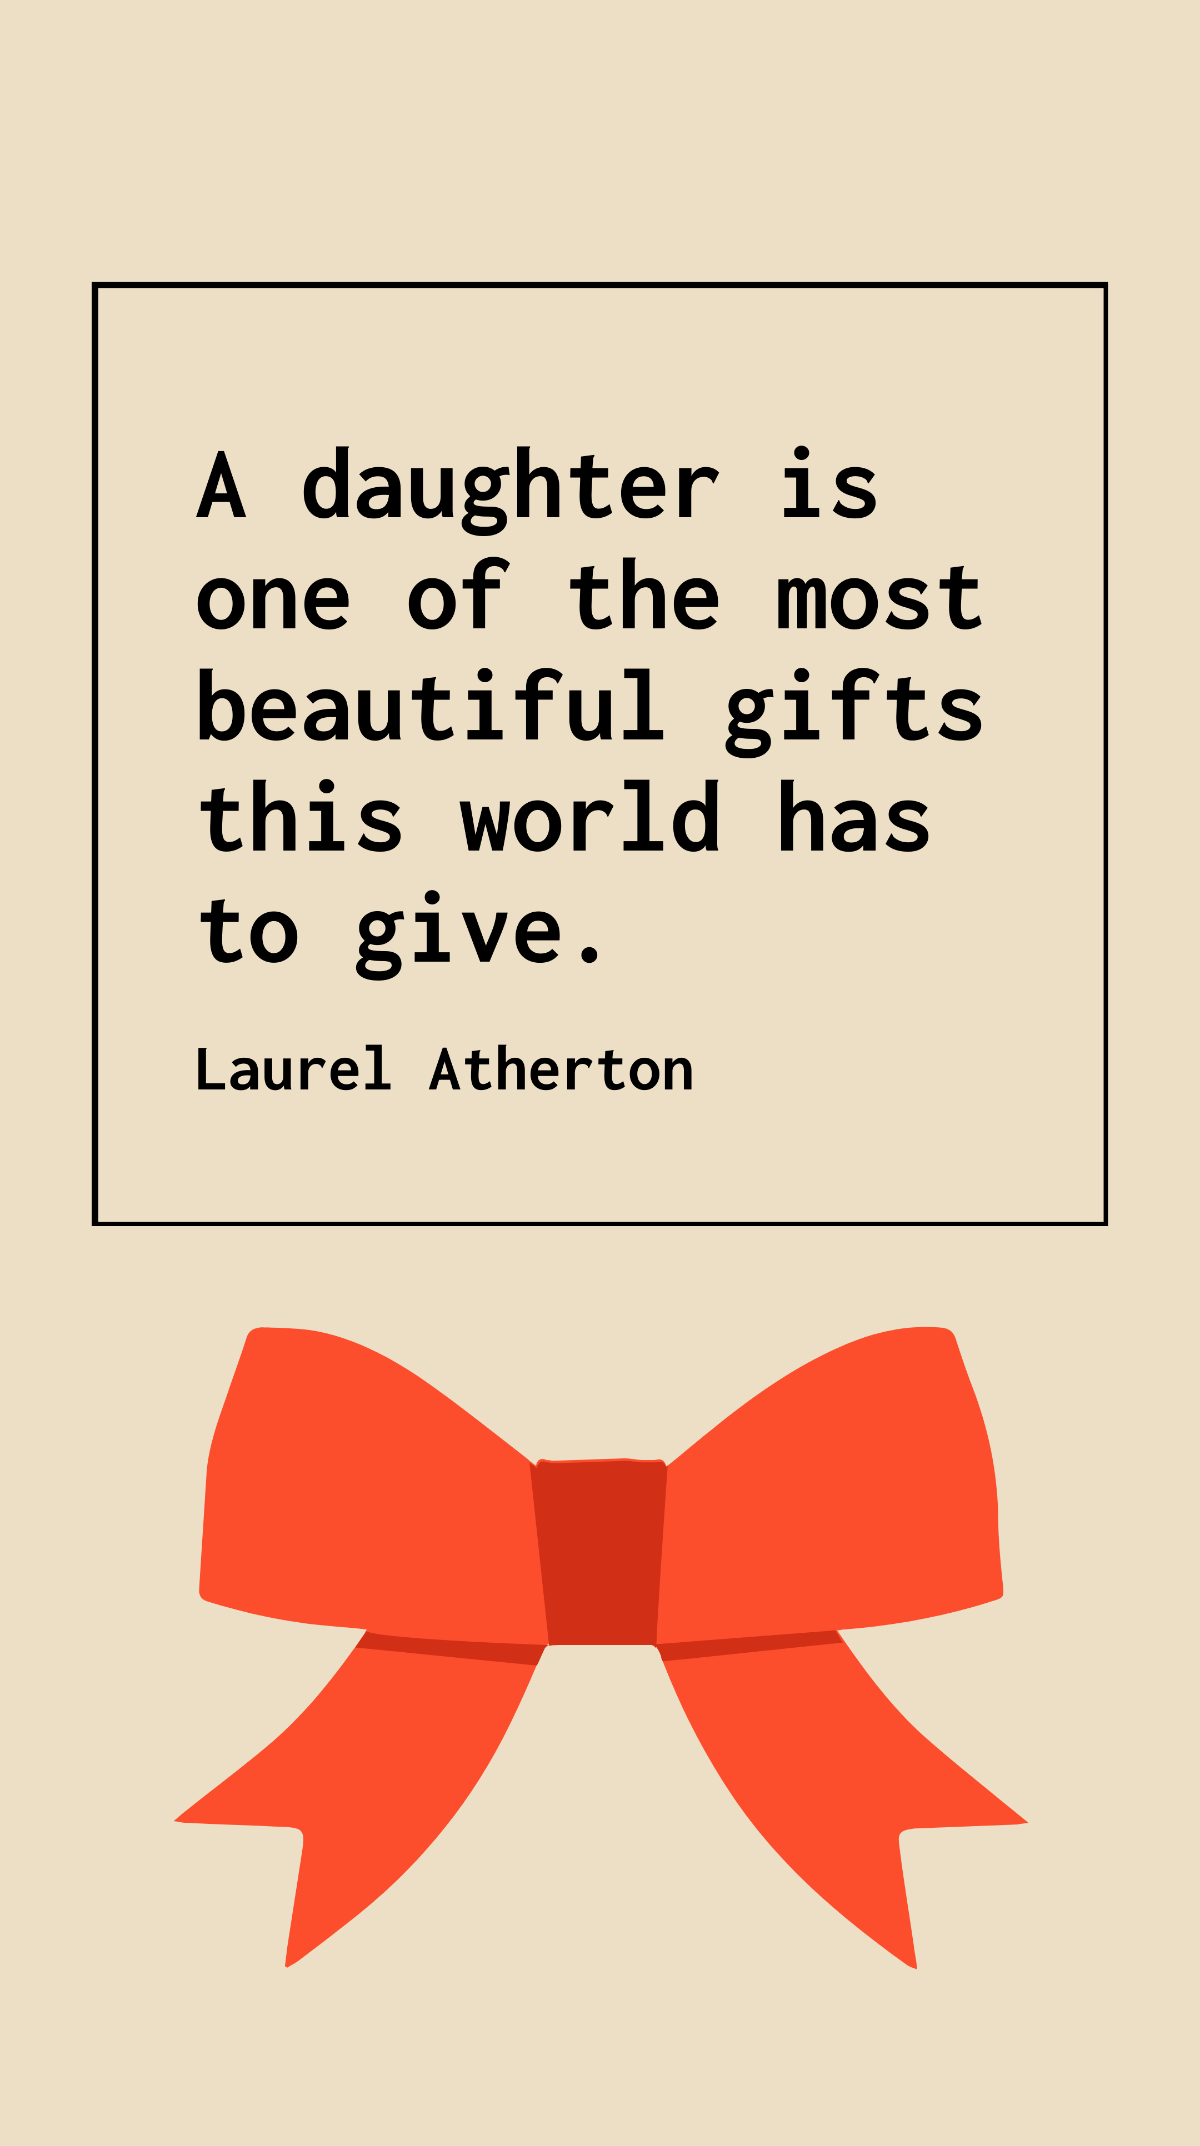 Laurel Atherton - A daughter is one of the most beautiful gifts this world has to give. Template